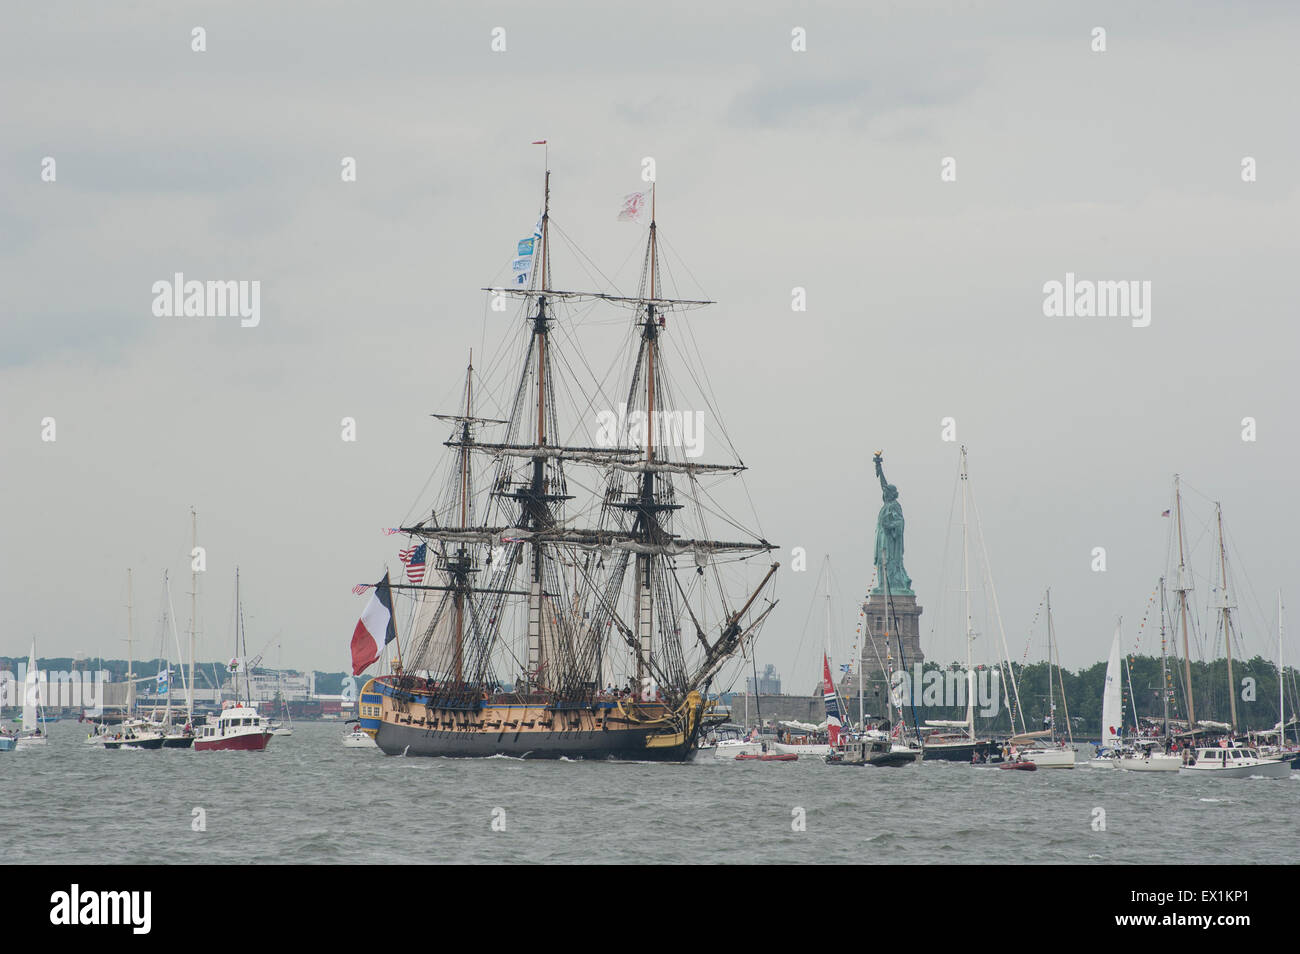 New York, New York, USA. 04th July, 2015. Hermione passing the Statue of Liberty in New York Harbor on Independence Day, July 4, 2015. The ship is a replica of the one that brought the Marquis de Lafayette to the U.S. colonies in March 1780, where he offered French aid to General George Washington. The Statue of Liberty was a gift to the United States from France. Credit:  Terese Loeb Kreuzer/Alamy Live News Stock Photo